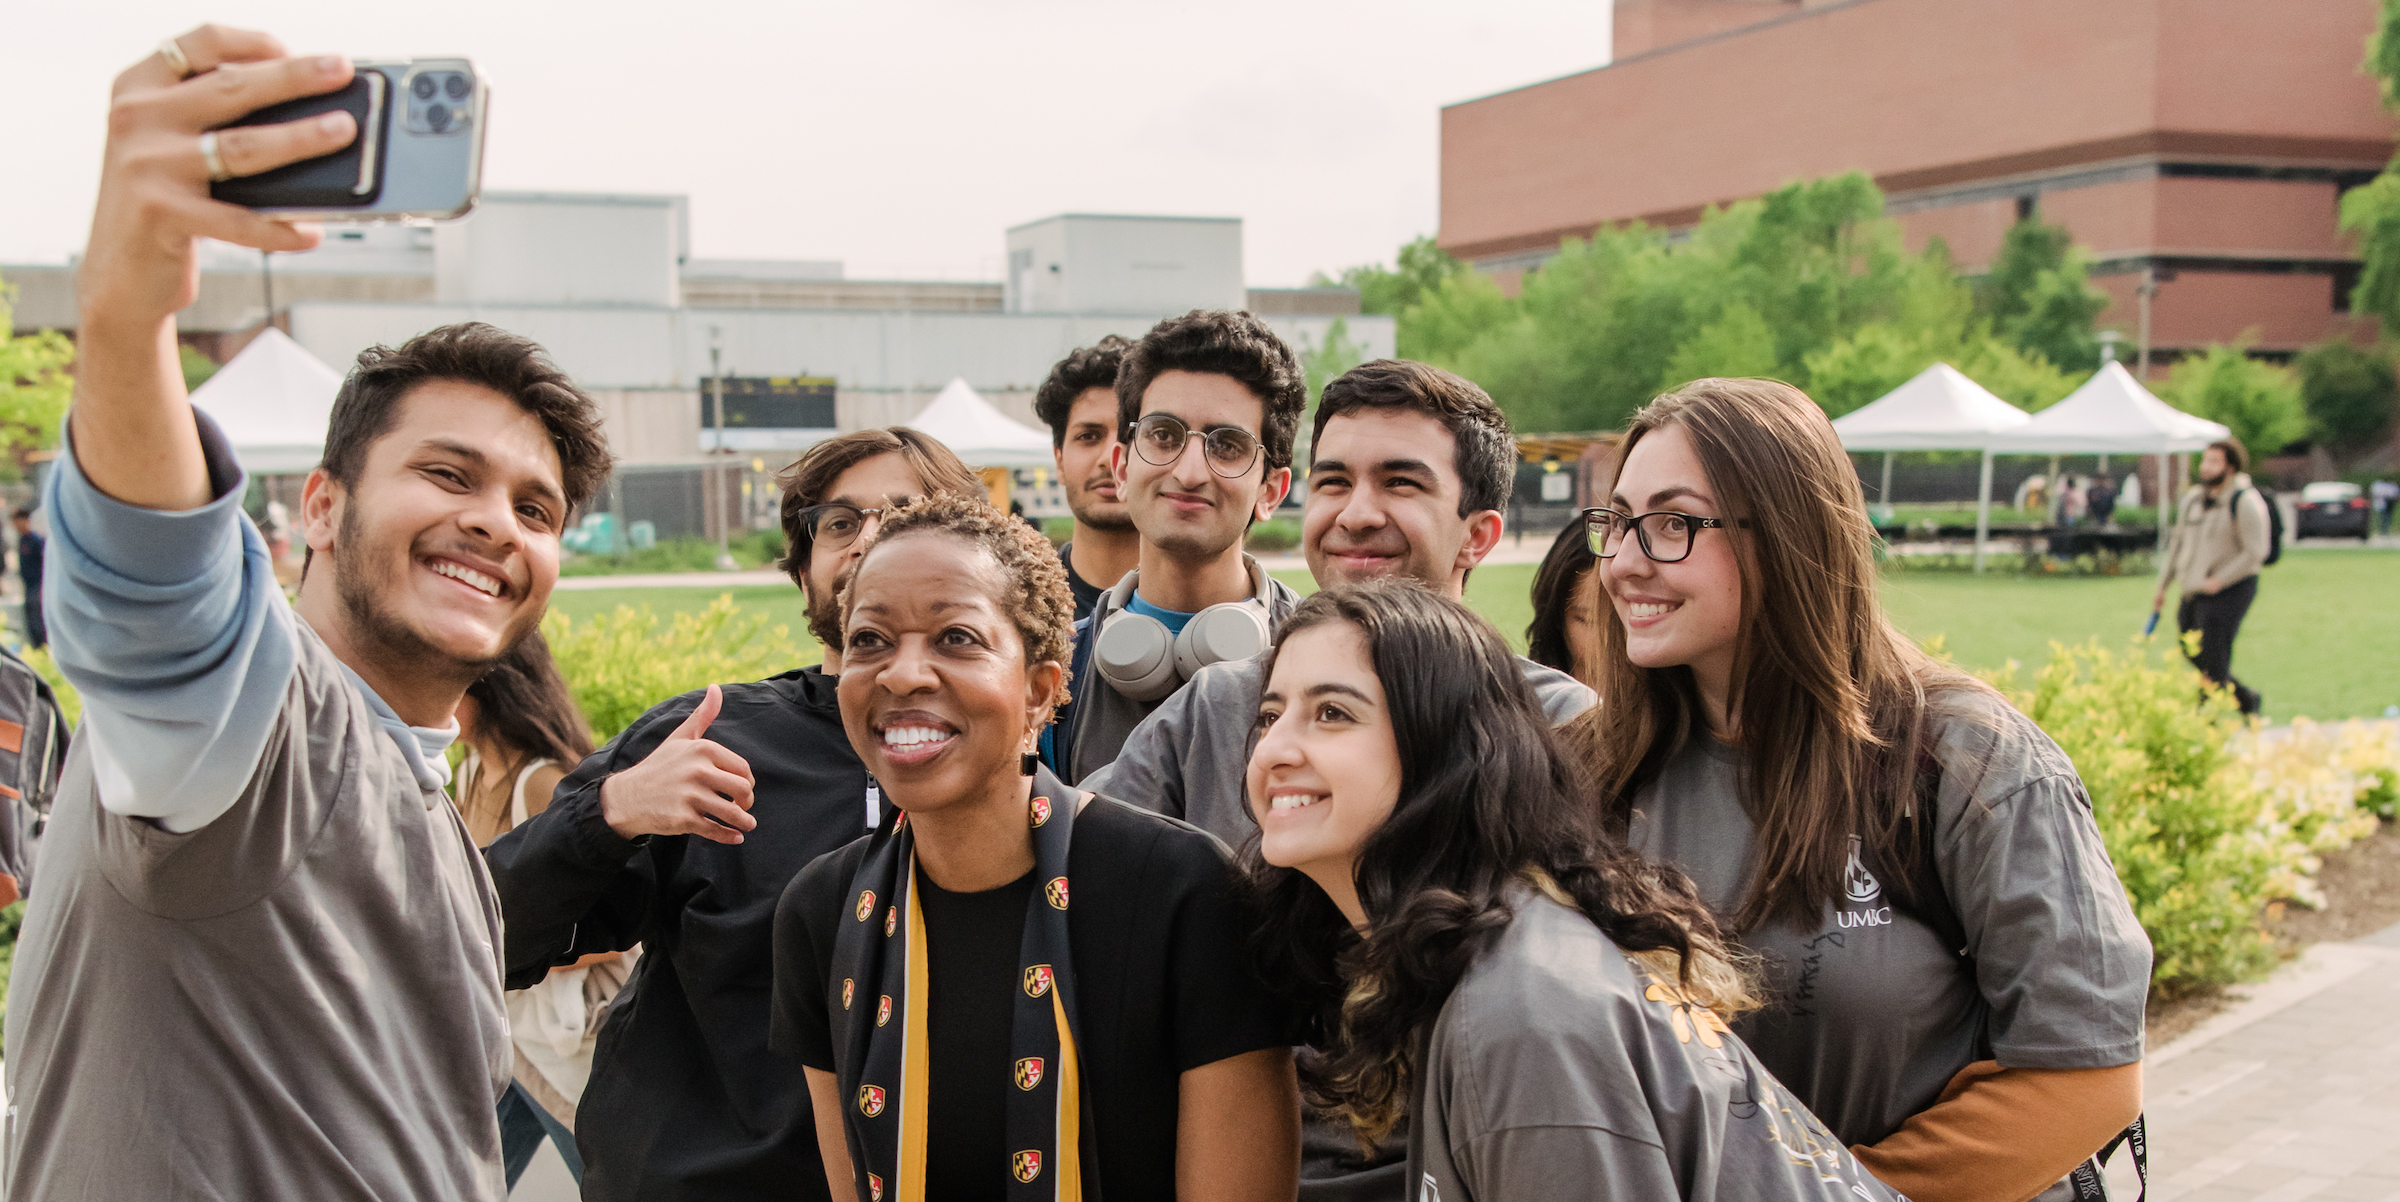 Wearing black and gold formal attire, UMBC's president Valerie Shears Ashby poses for a selfie with excited students.